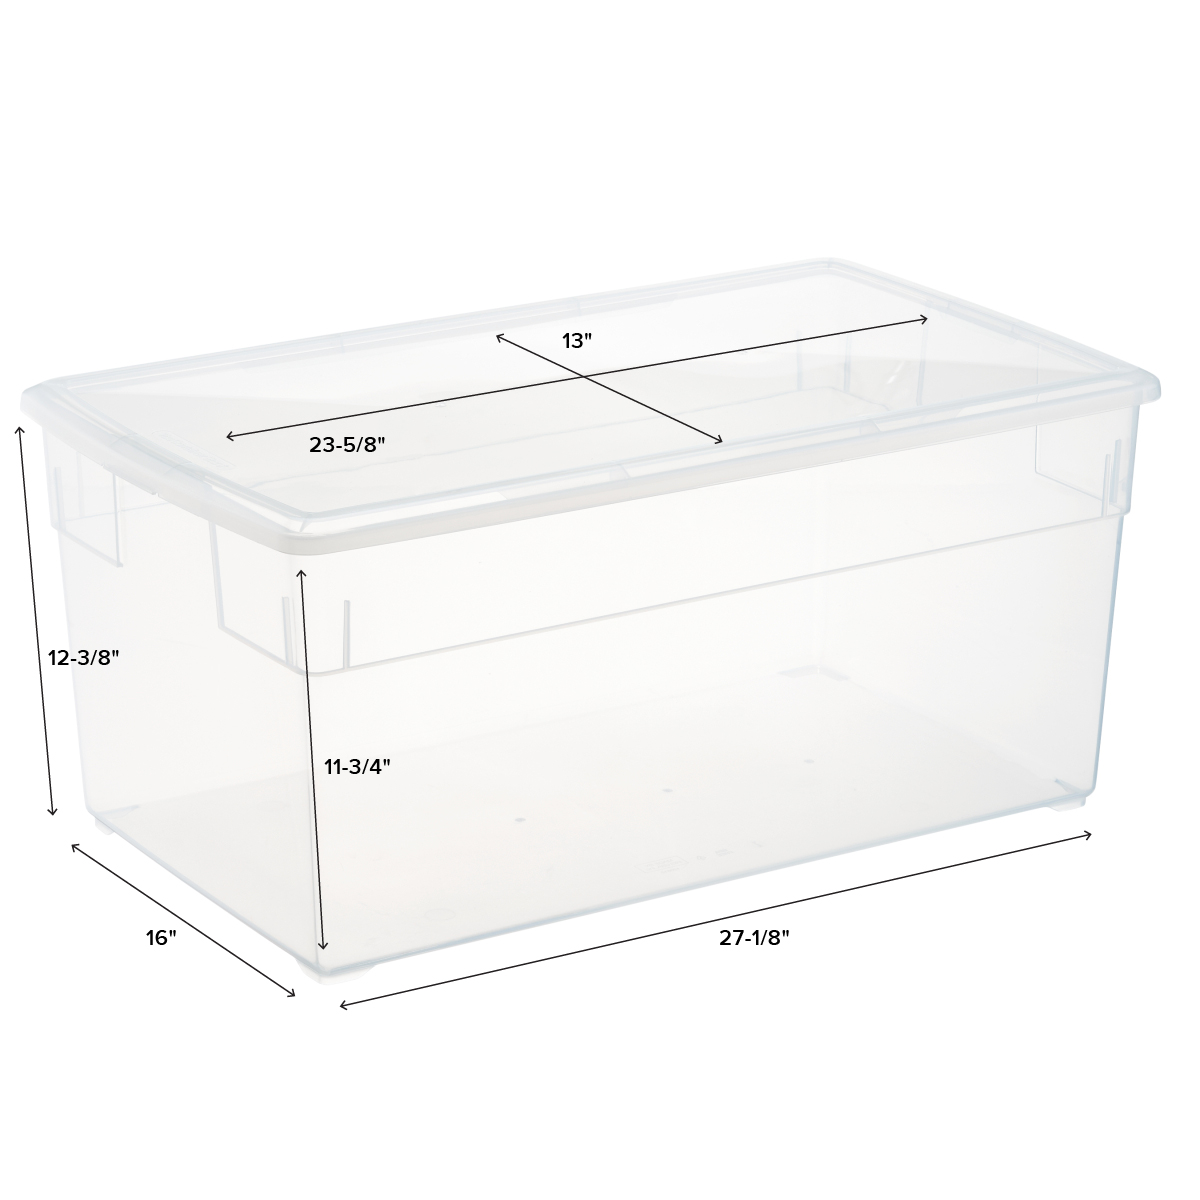 Our Best Box White, 16-1/2 x 12-1/2 x 10-3/4 H | The Container Store